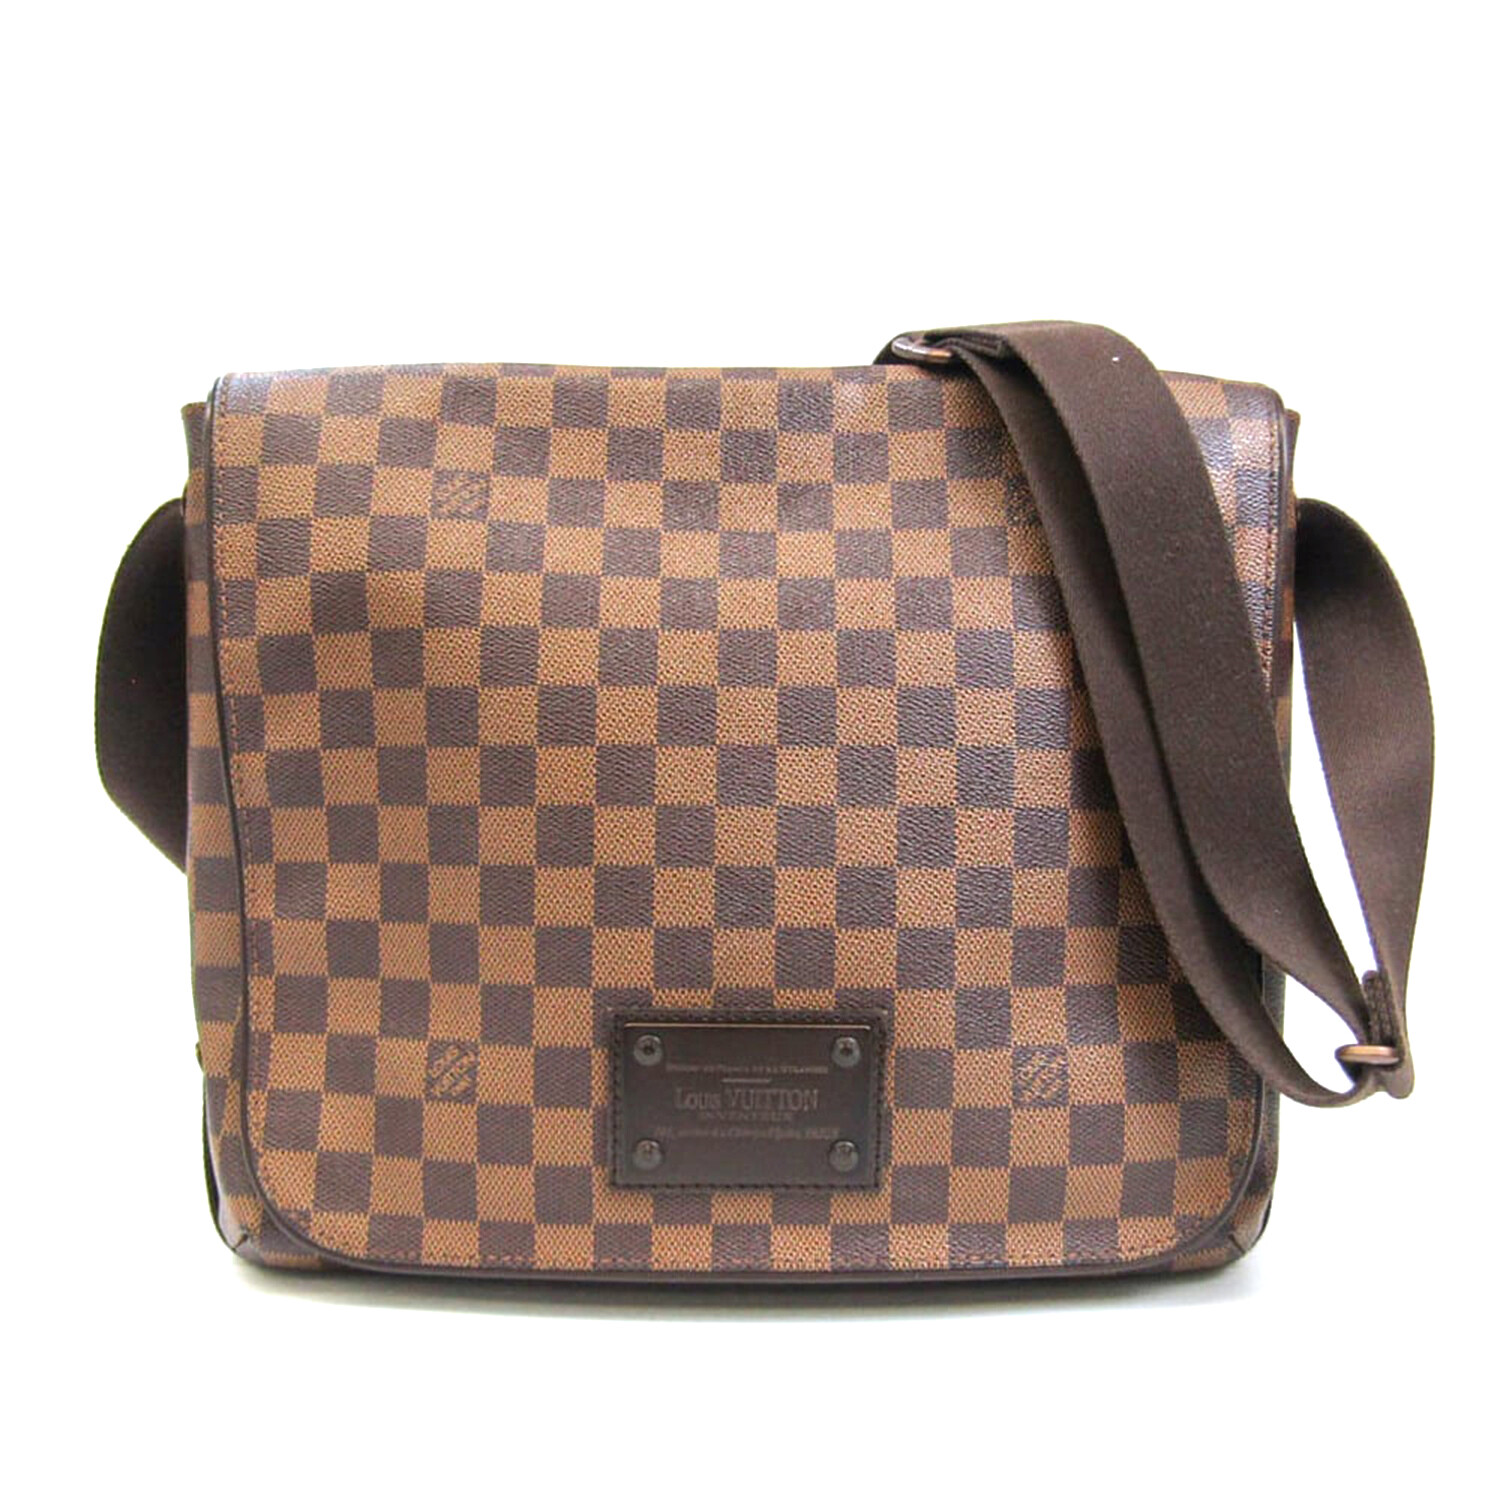 Buy Pre-owned & Brand new Luxury Louis Vuitton Damier Ebene Canvas